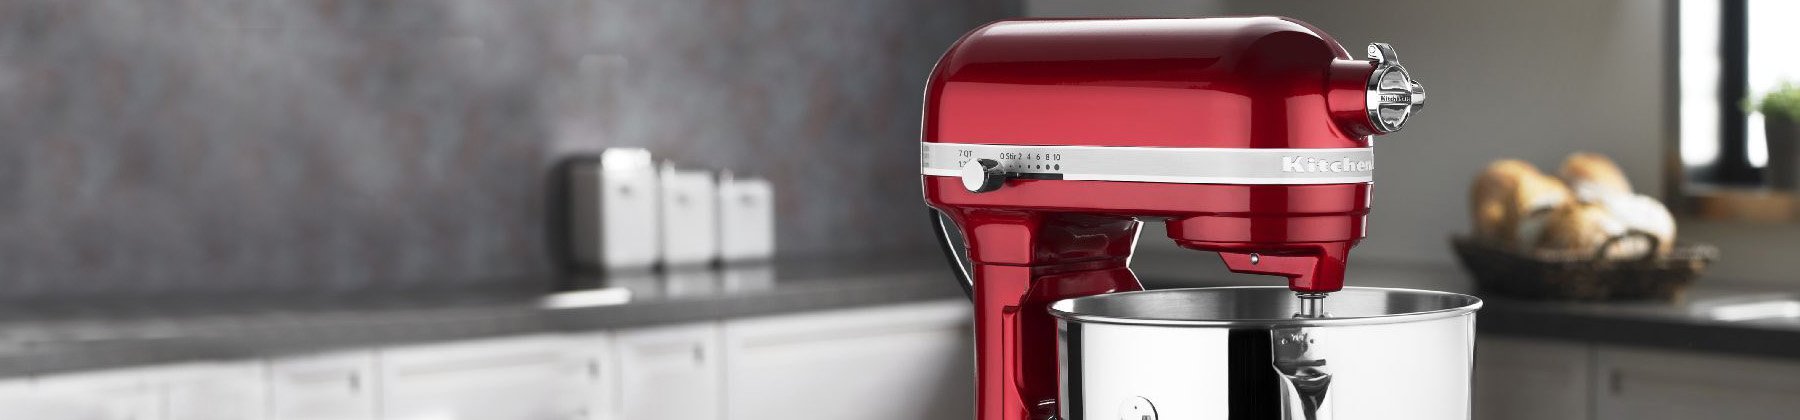 https://cdn.everythingkitchens.com/media/wysiwyg/images/KitchenAid/Mixer-Compatibile-Collection-Banner-7-8.jpg